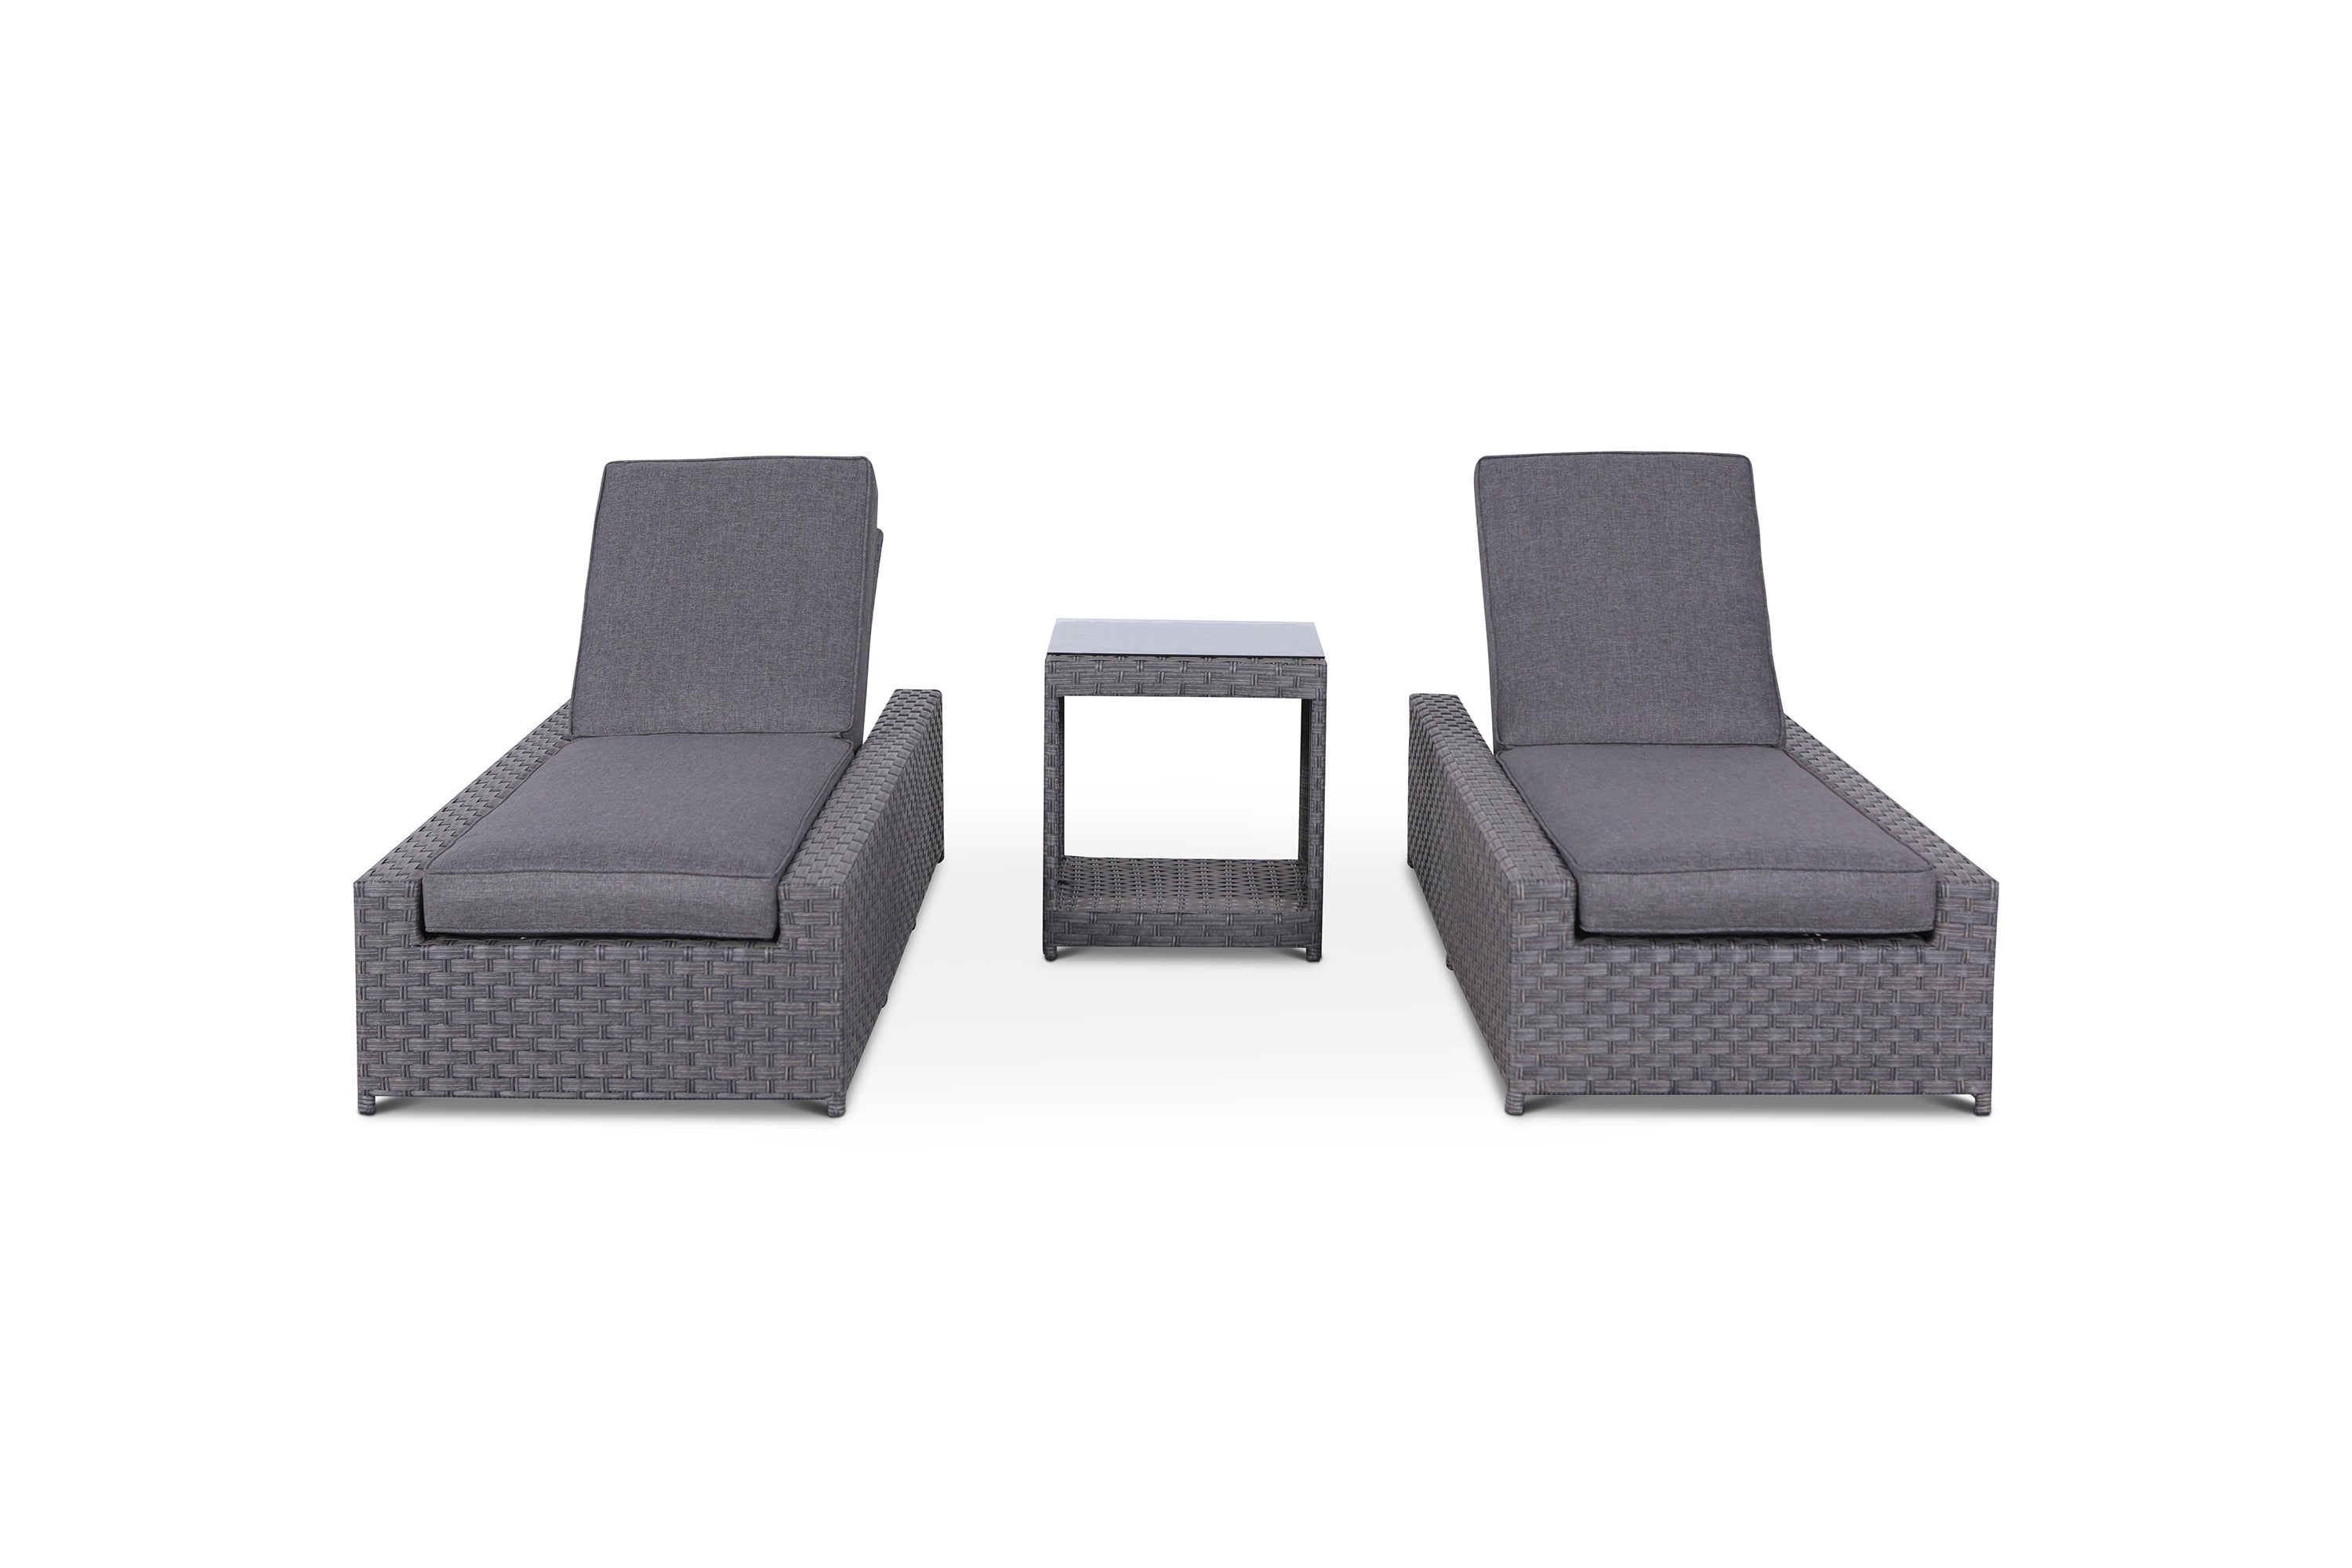 Cromwell 3 Piece Set of Outdoor Wicker Chaise Lounges with End Table